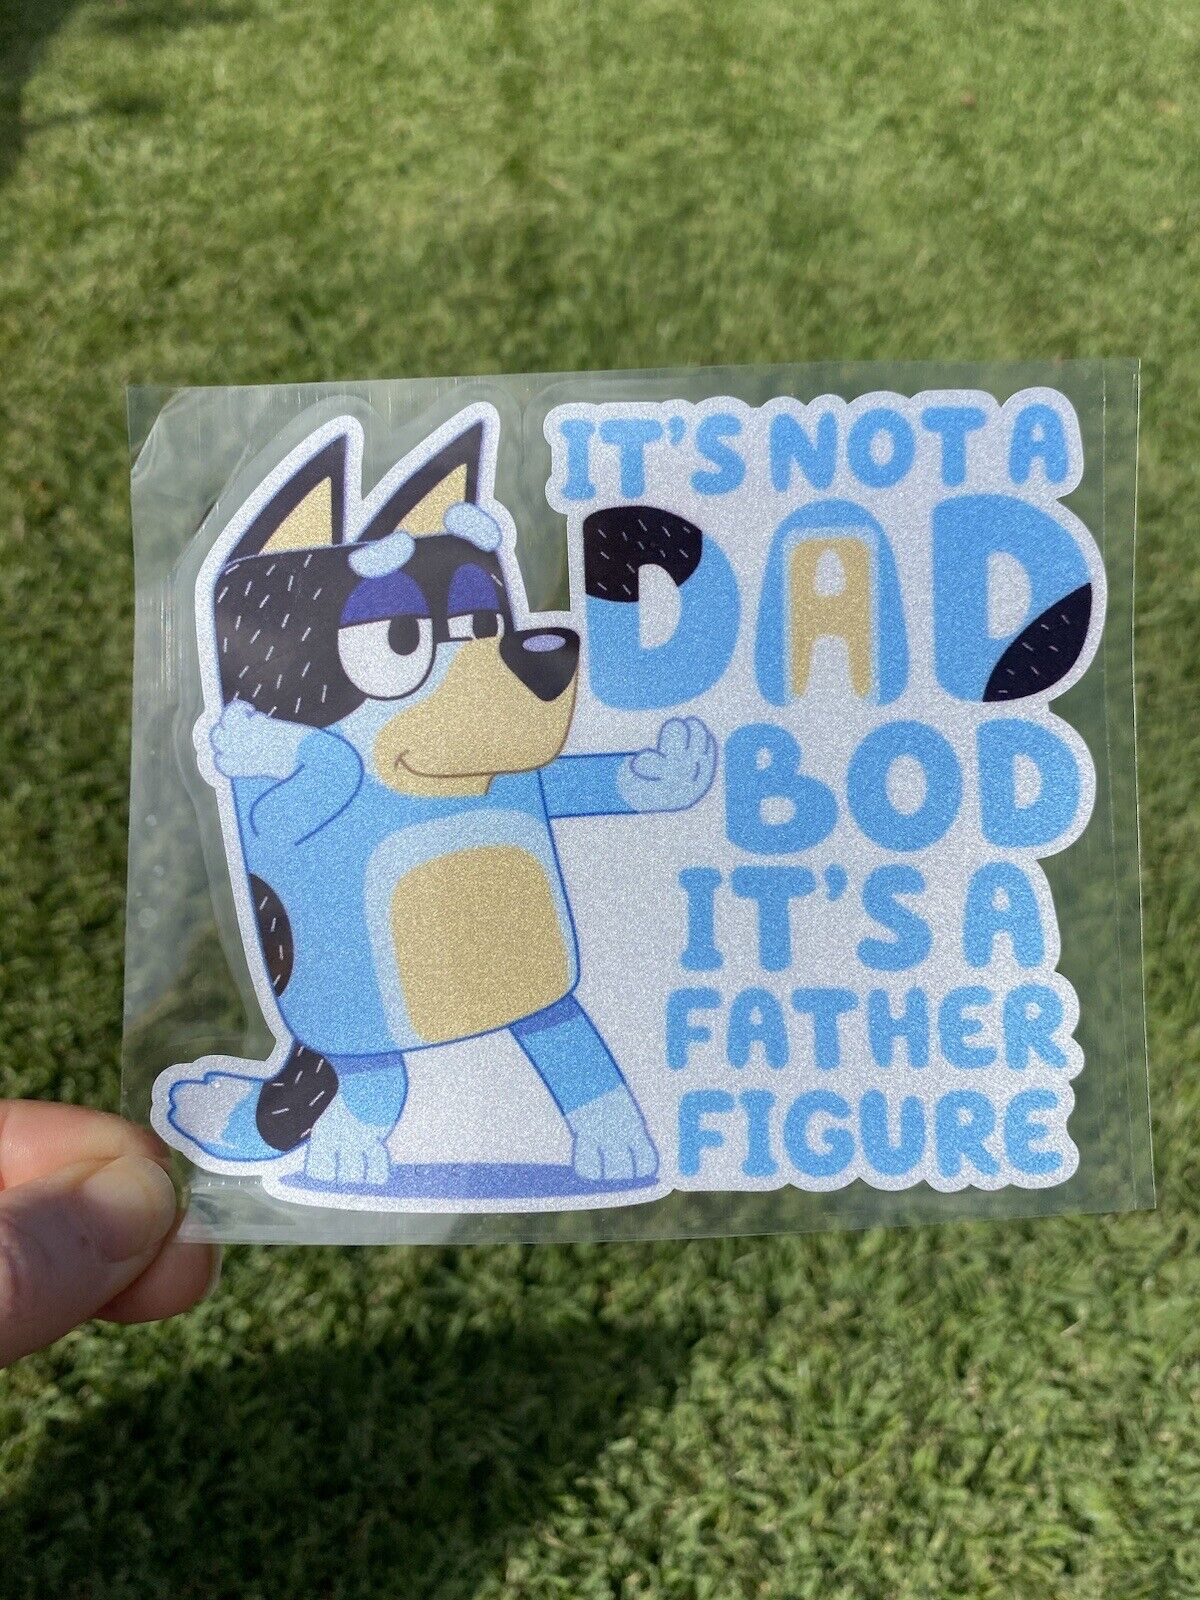 IT’S NOT A DAD BOD IT’S A FATHER FIGURE, CAR STICKER BANDIT From Bluey